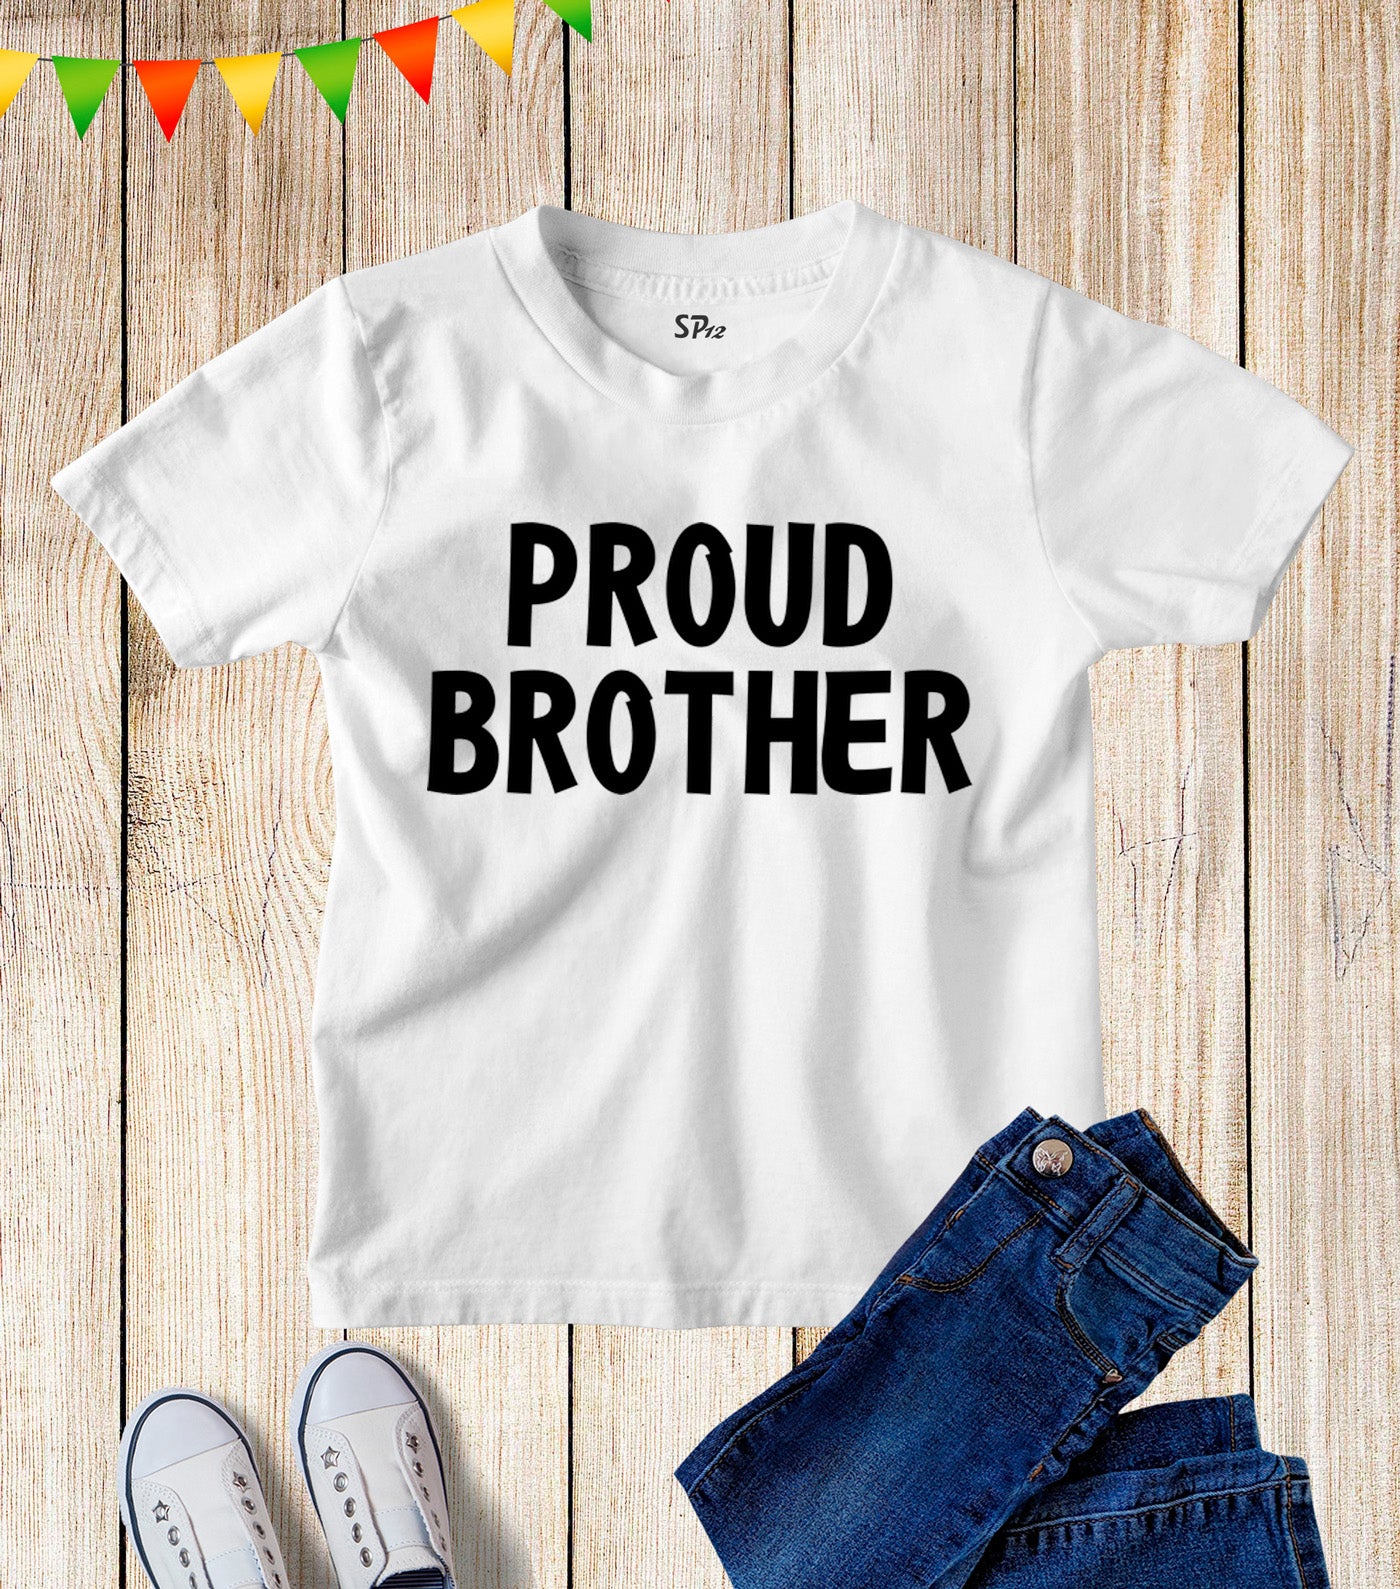 Proud Brother Kids T Shirt Family Gift tee